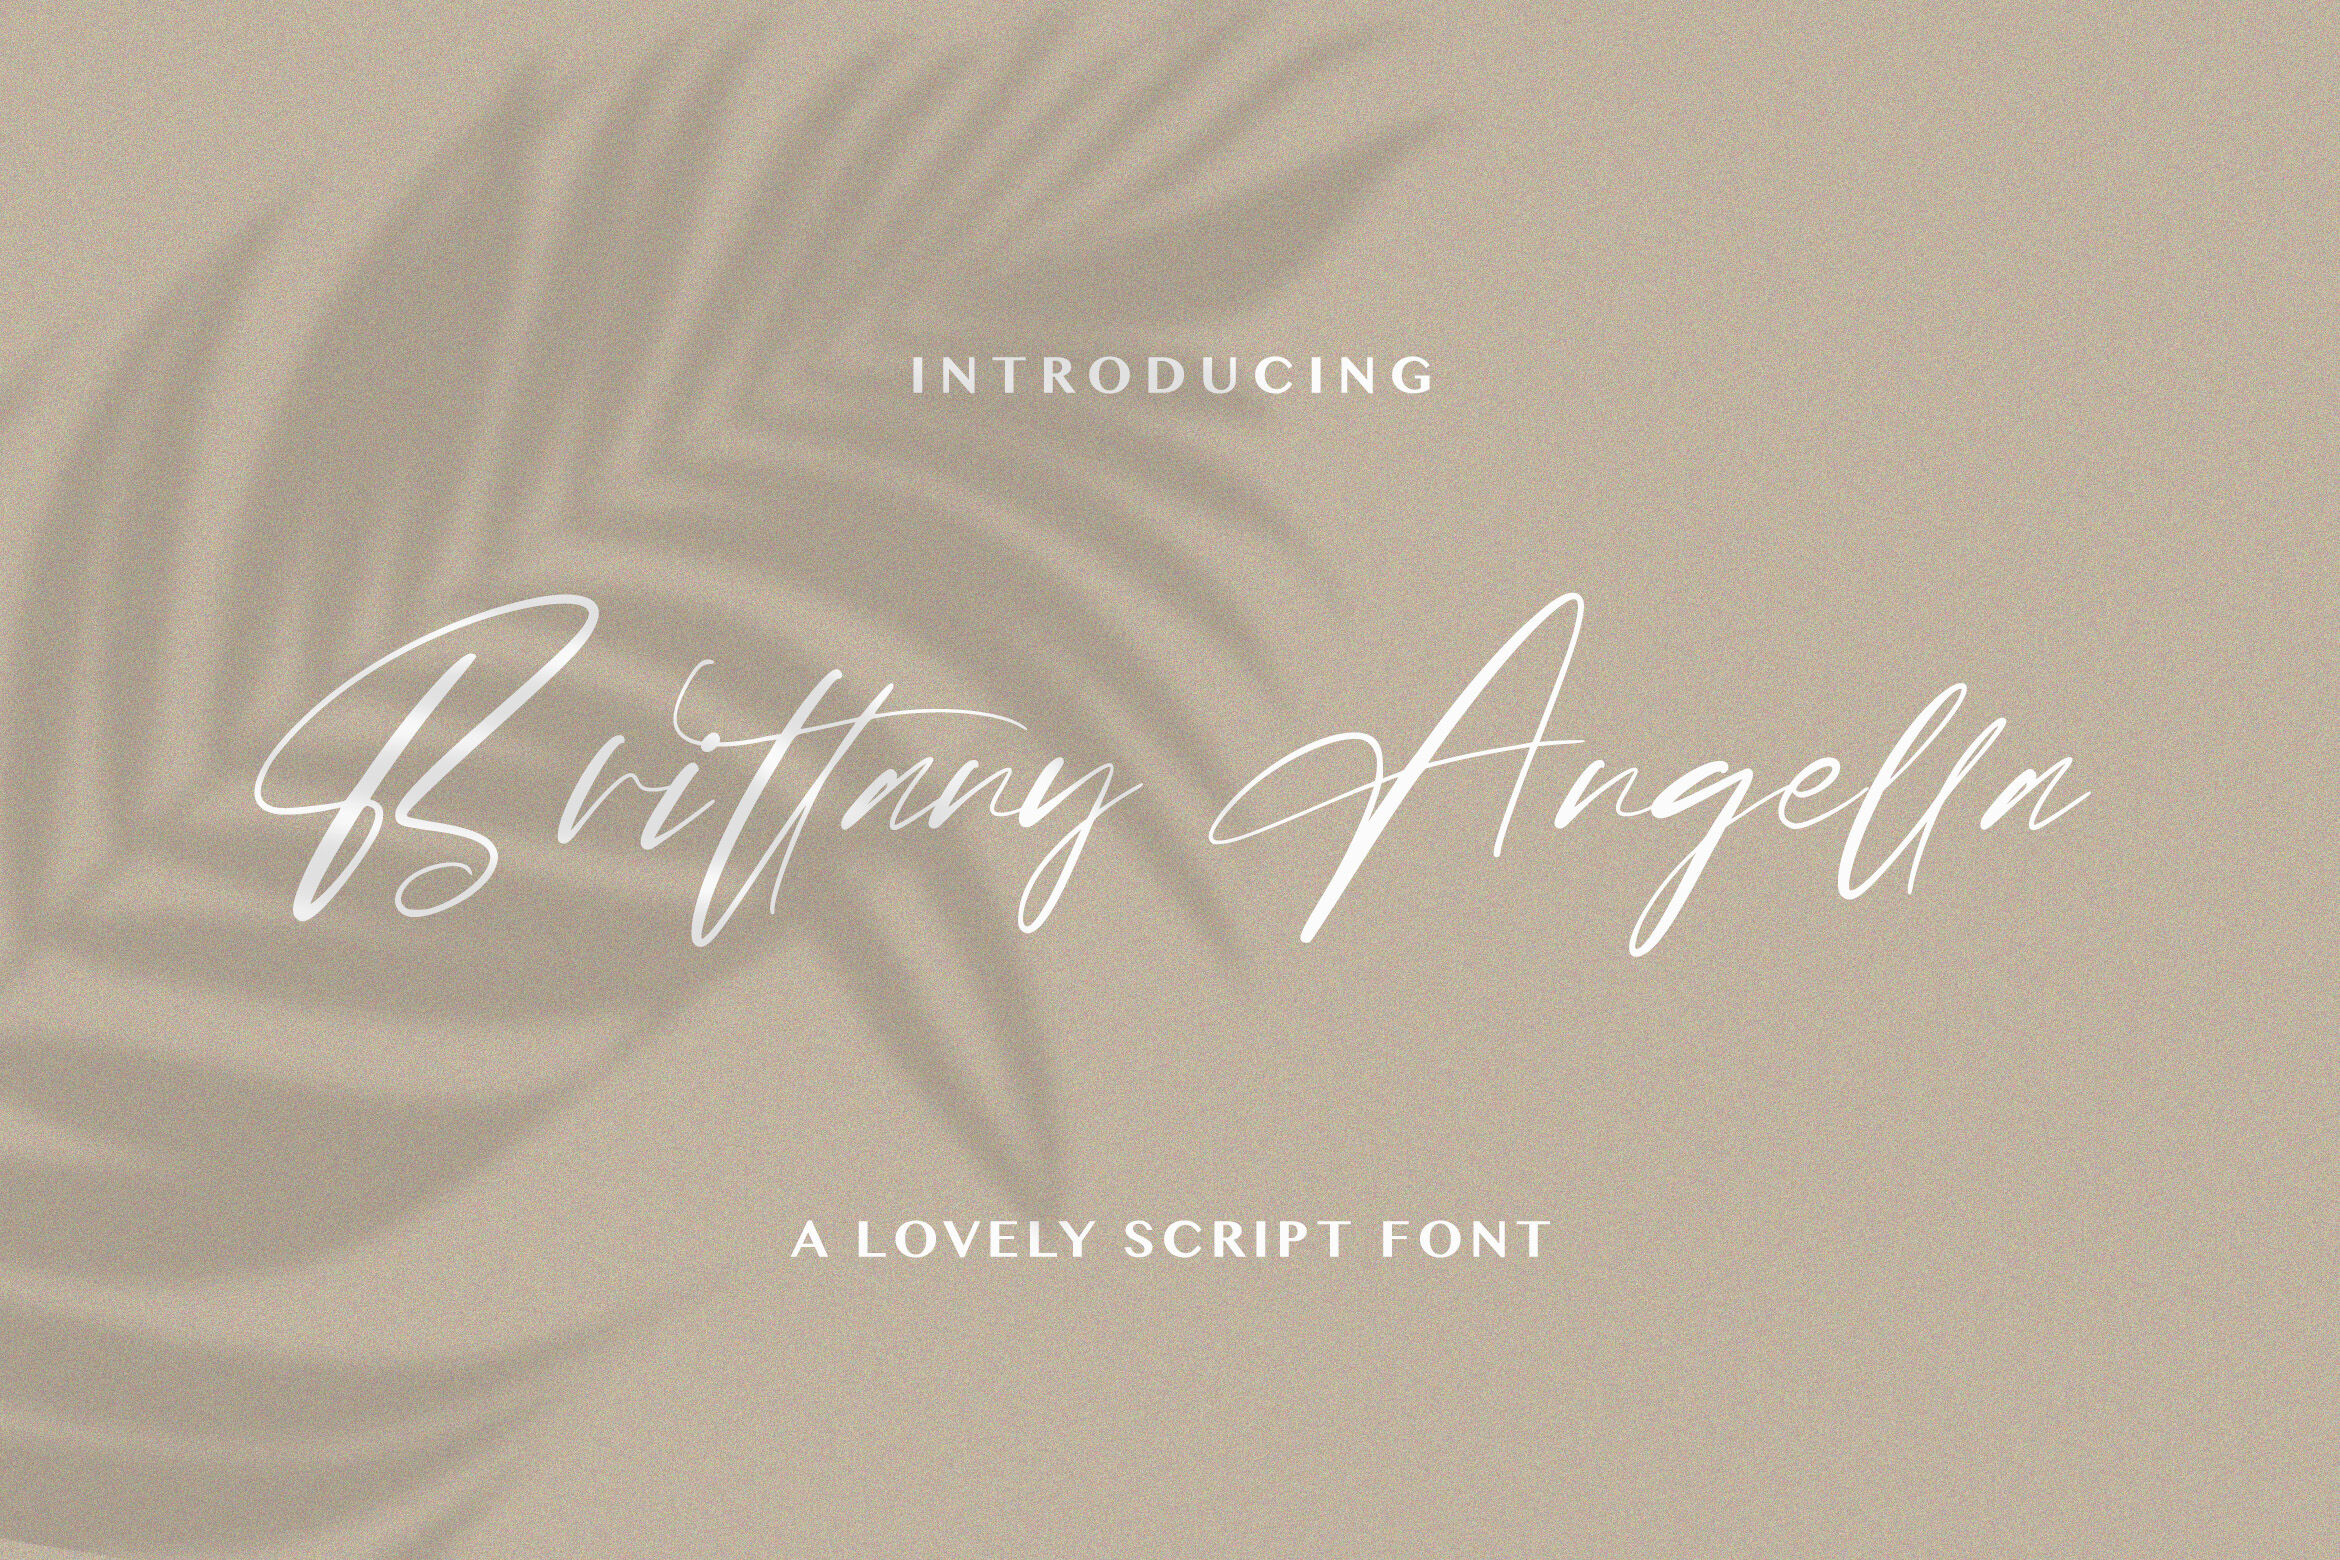 Шрифт Brittany. Brittany font. Signature Light. Scripted love